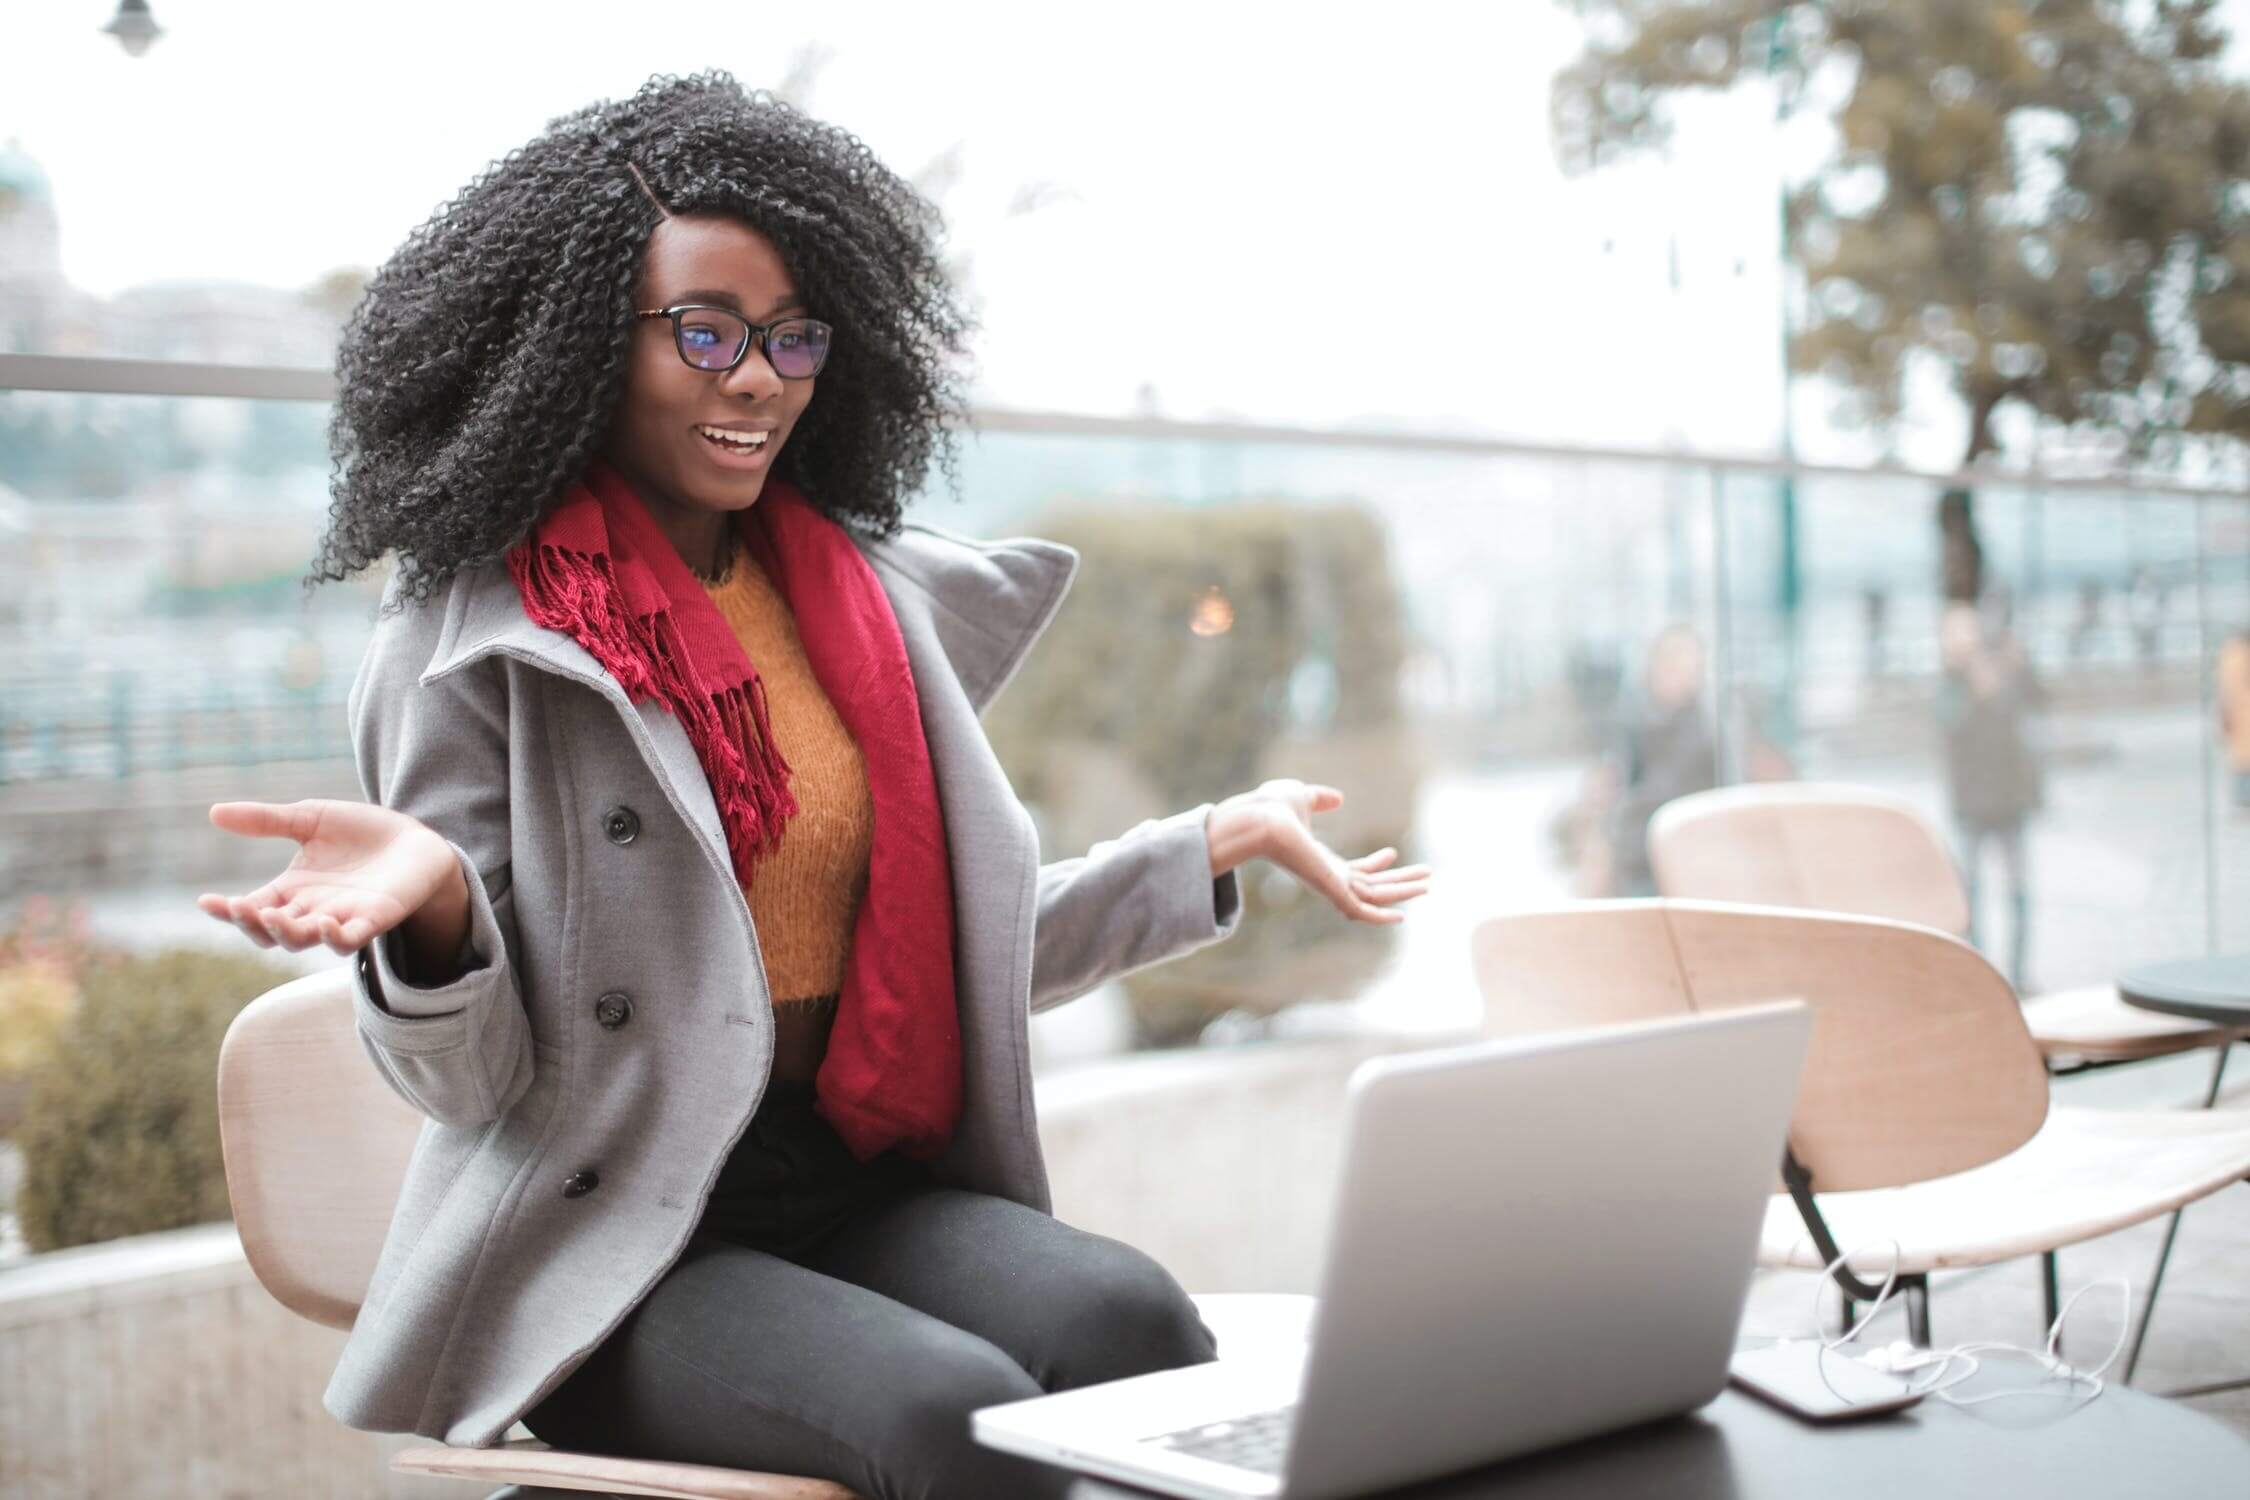 Black woman sitting outside with scarf and coat on looking at MacBook on table